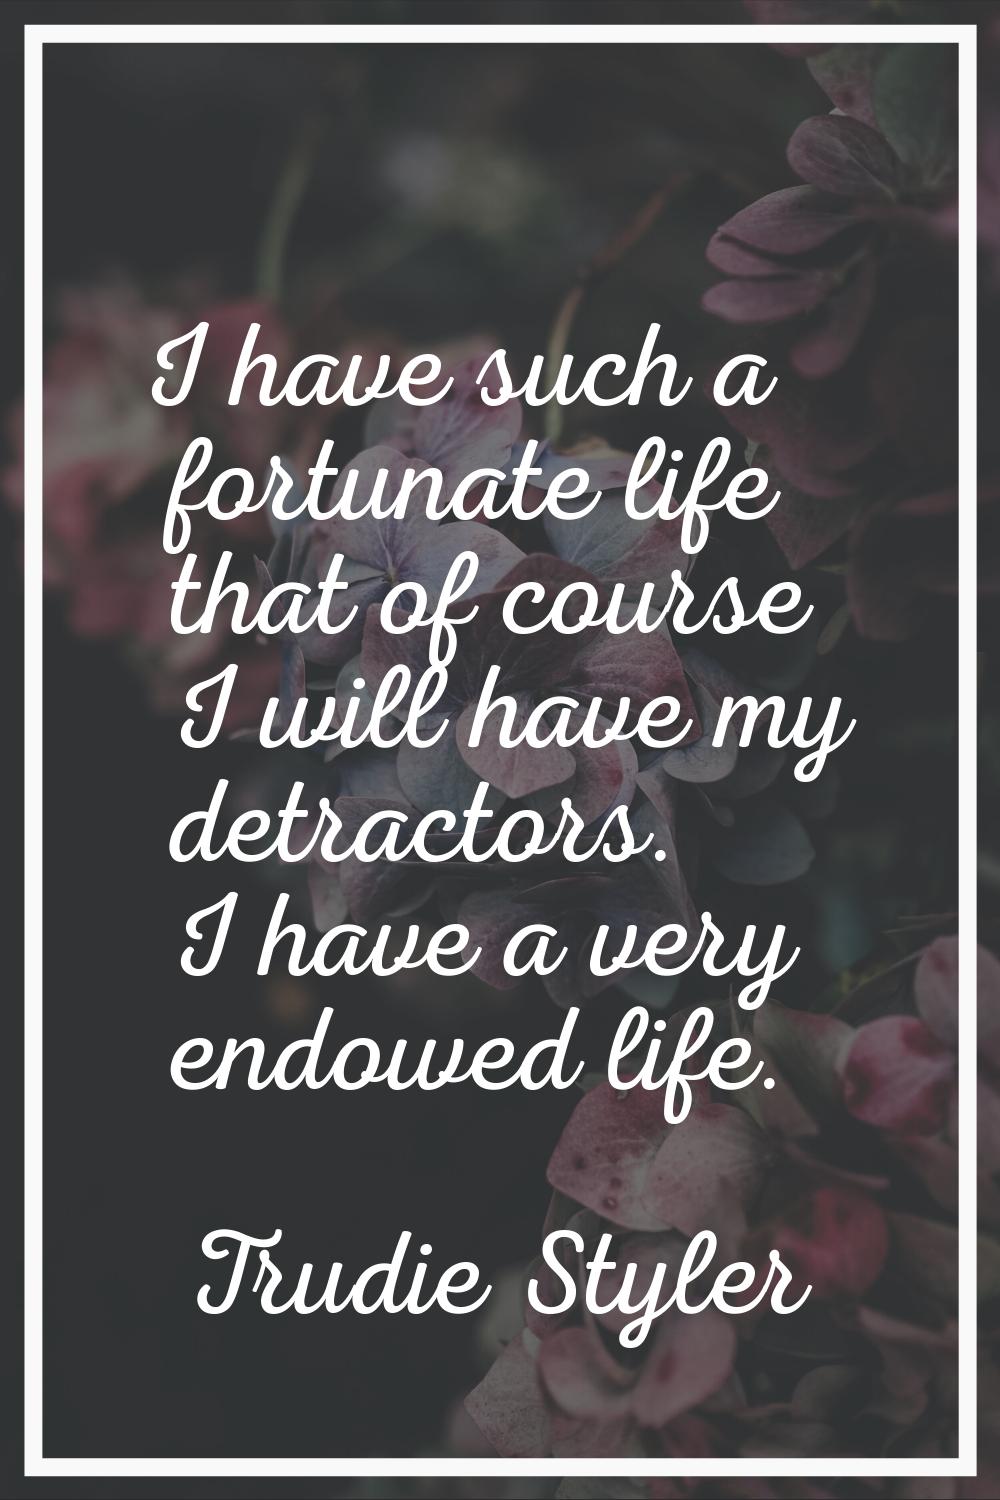 I have such a fortunate life that of course I will have my detractors. I have a very endowed life.